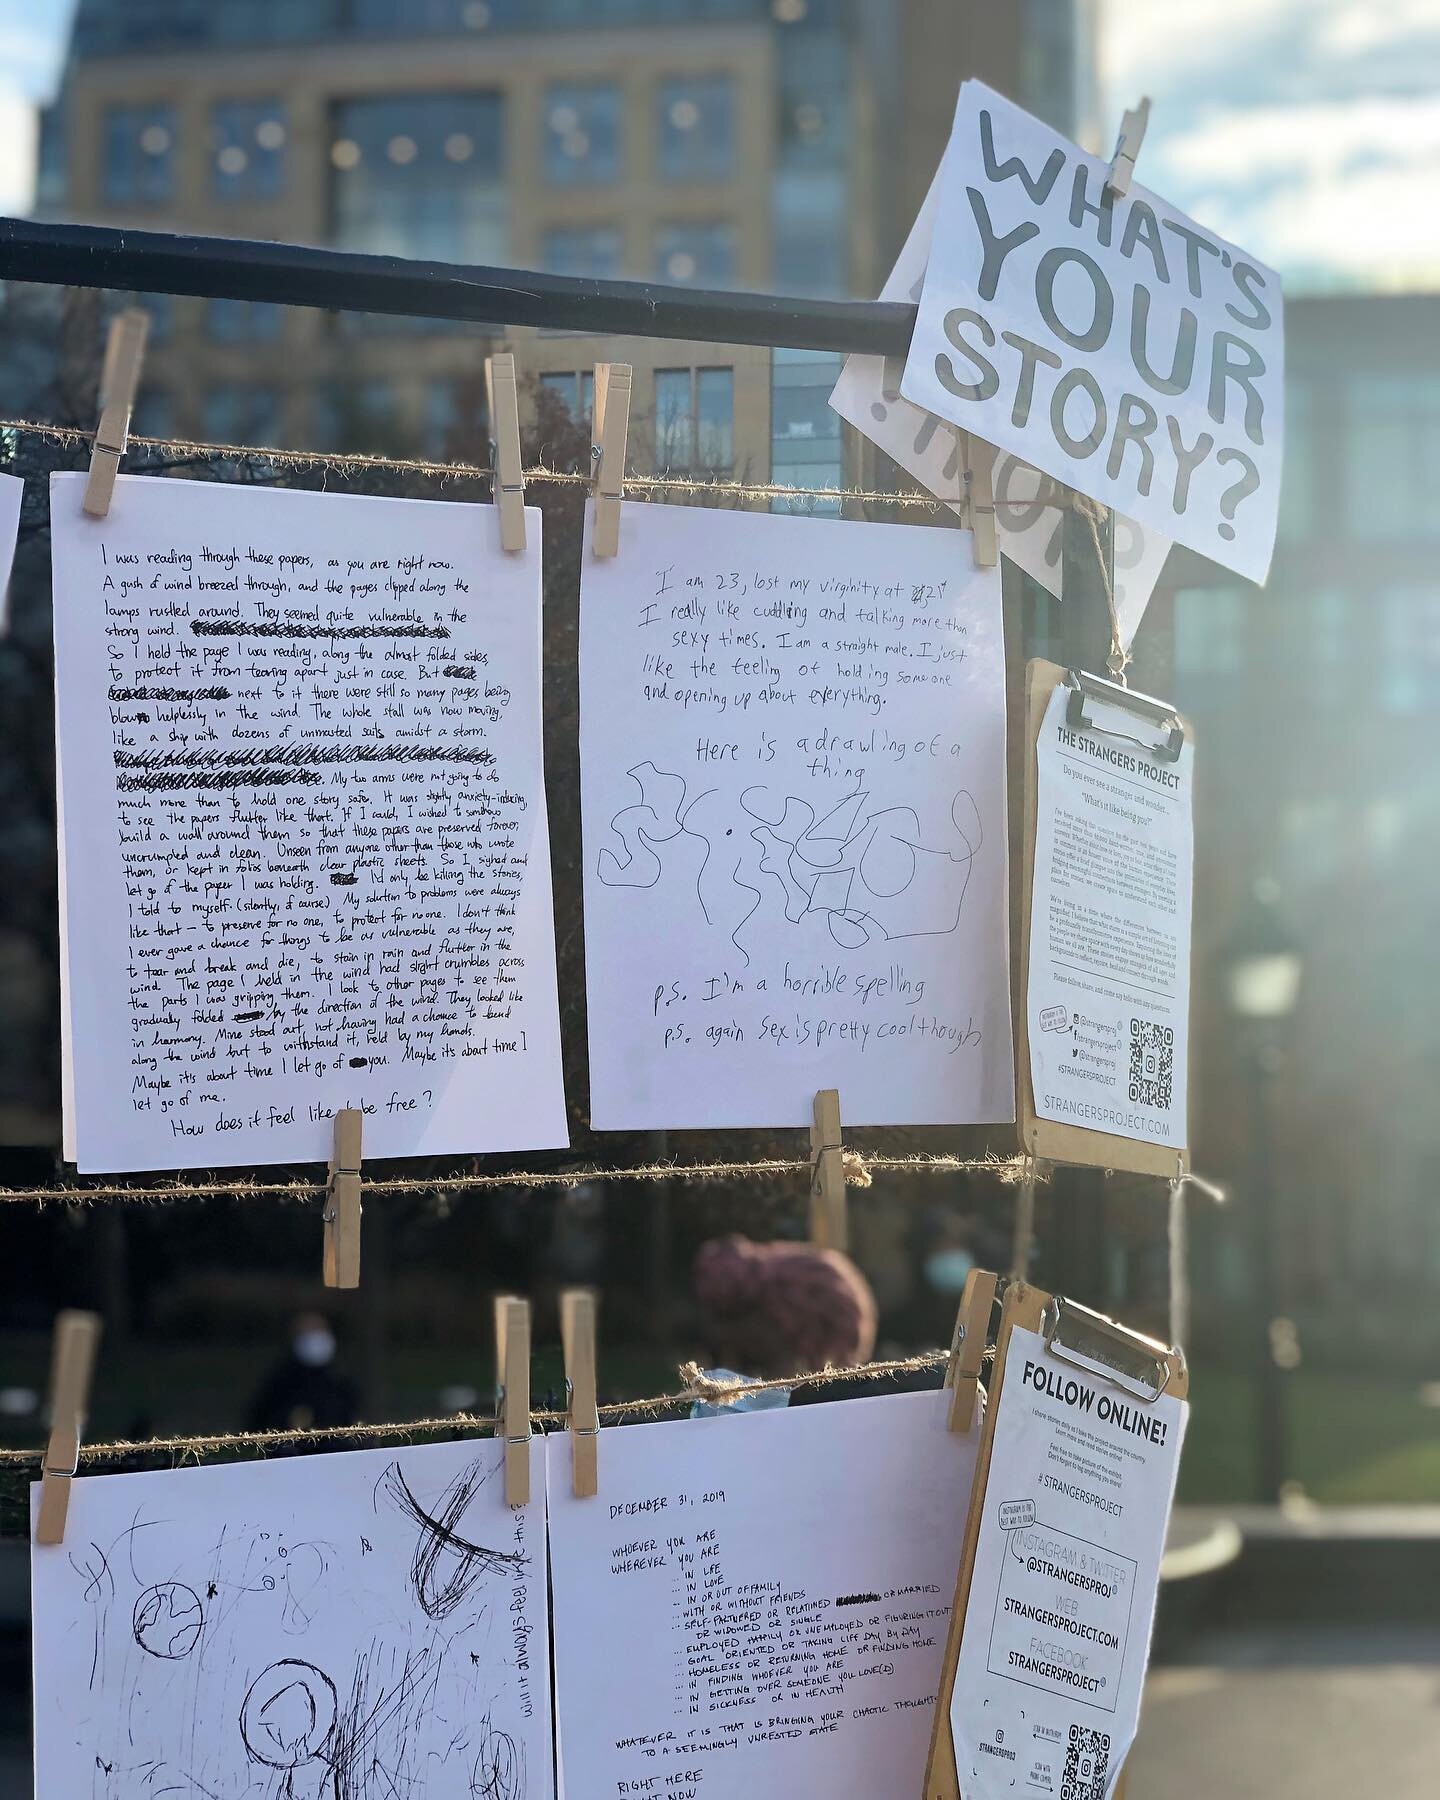 I first stumbled upon @strangersproj a little over a year ago. Without knowing what this project was about, I was immediately drawn to it. I spent a long time reading the handwritten notes on display, wanting to honor each story by giving it my full 